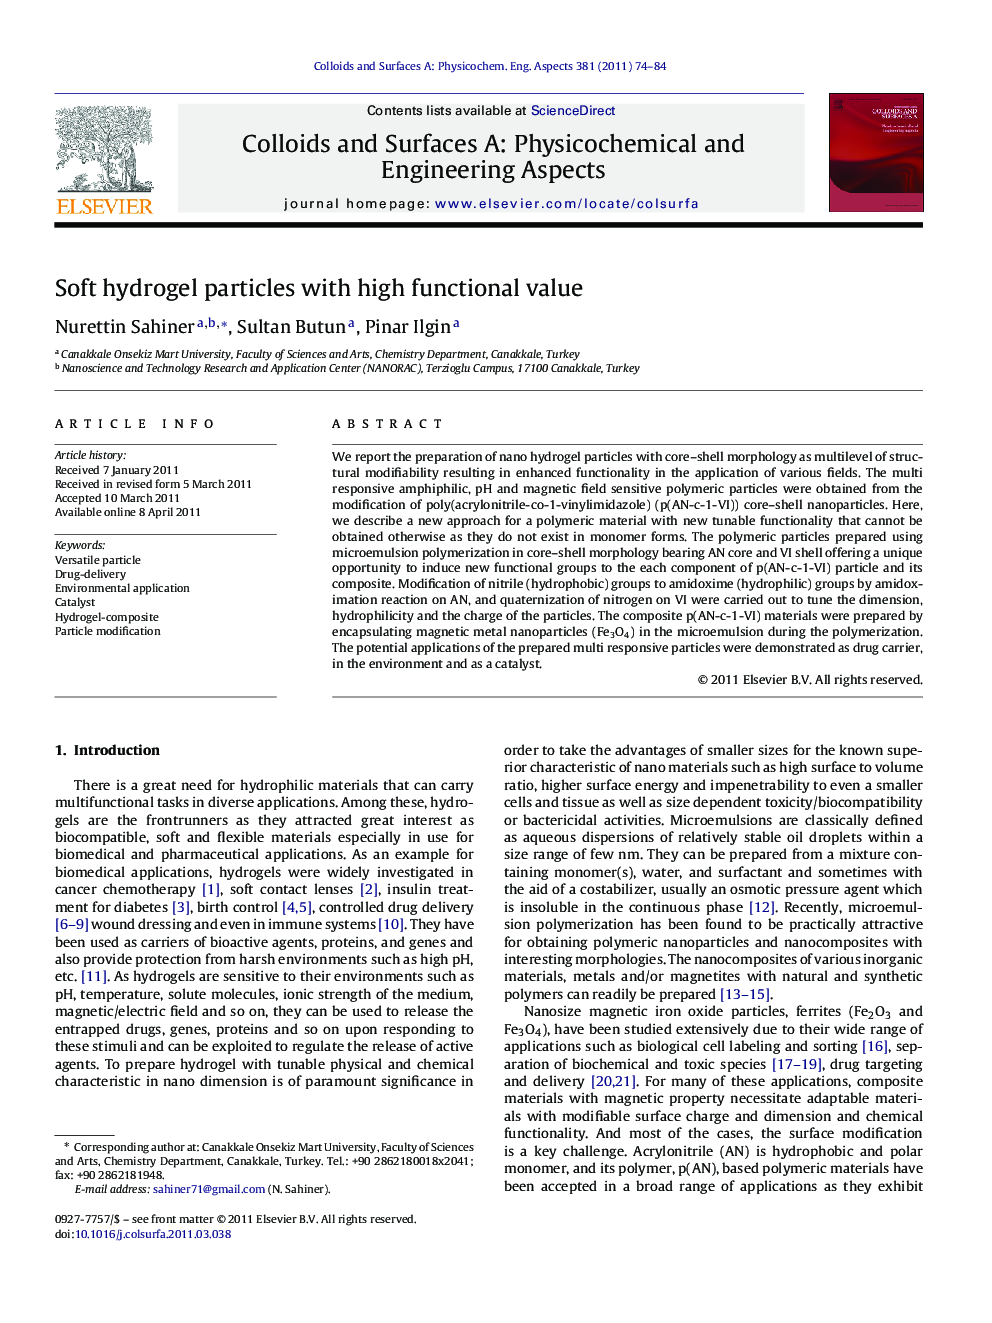 Soft hydrogel particles with high functional value